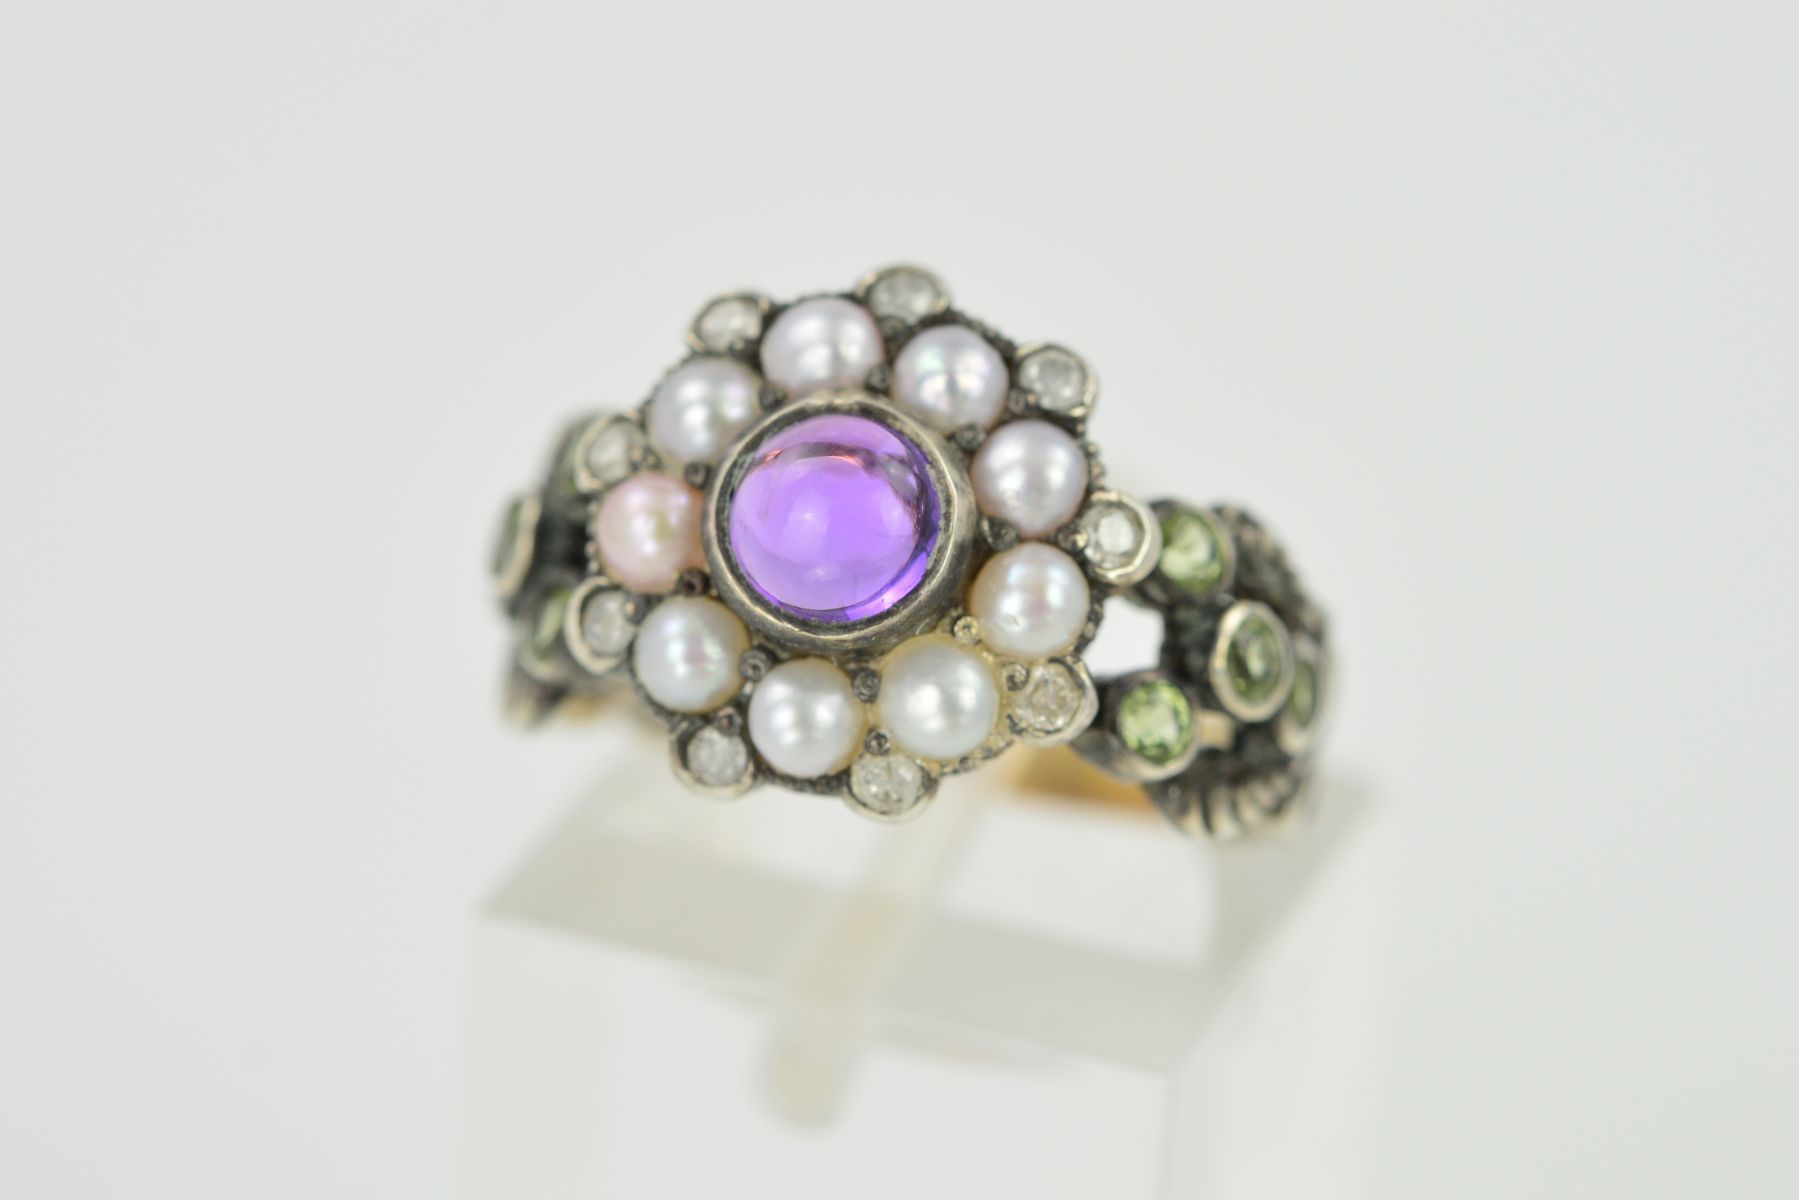 AN AMETHYST, SPLIT PEARL AND DIAMOND RING, designed as a central circular amethyst cabochon within a - Image 2 of 3